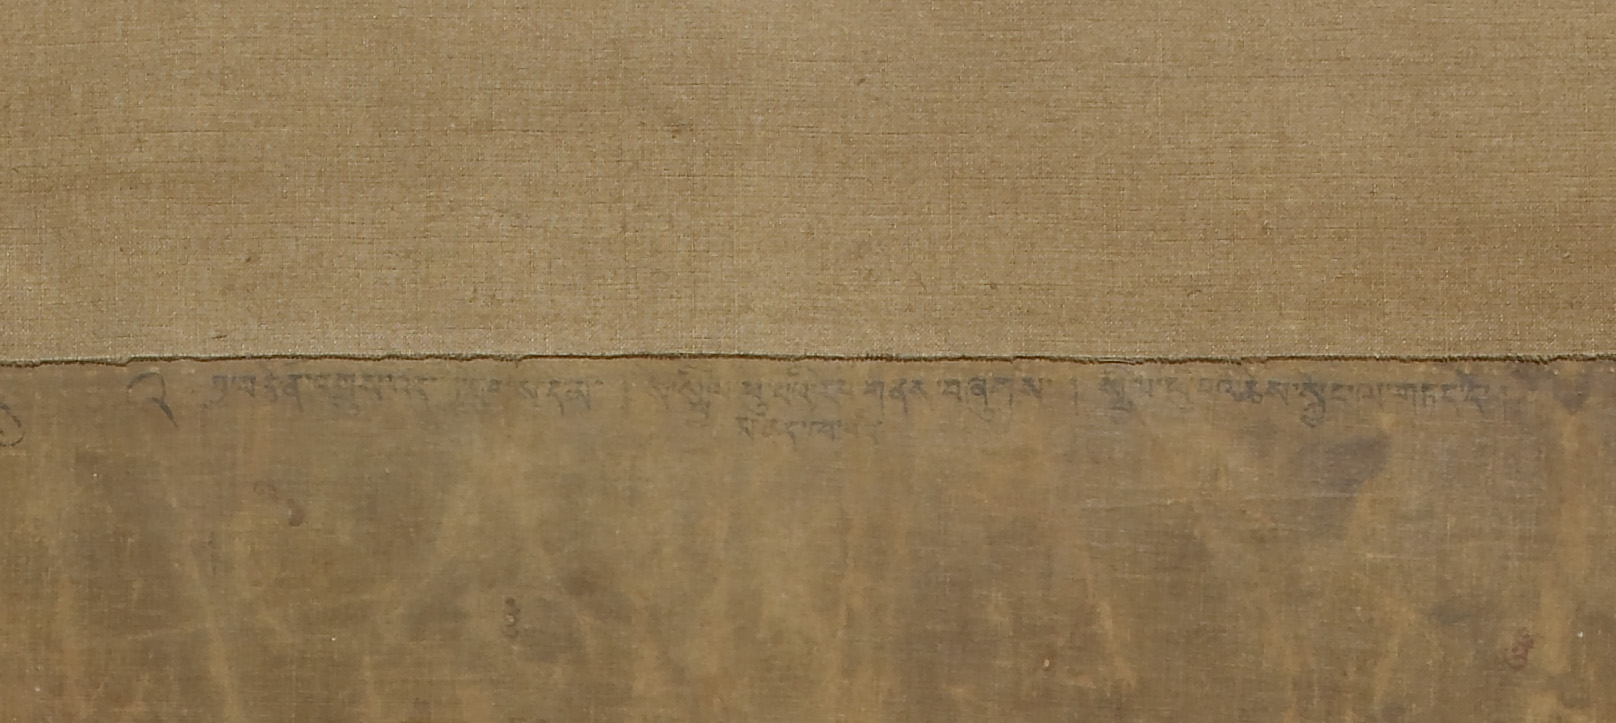 Close view of beige, textured surface with long line of Tibetan script at center underneath horizontal seam